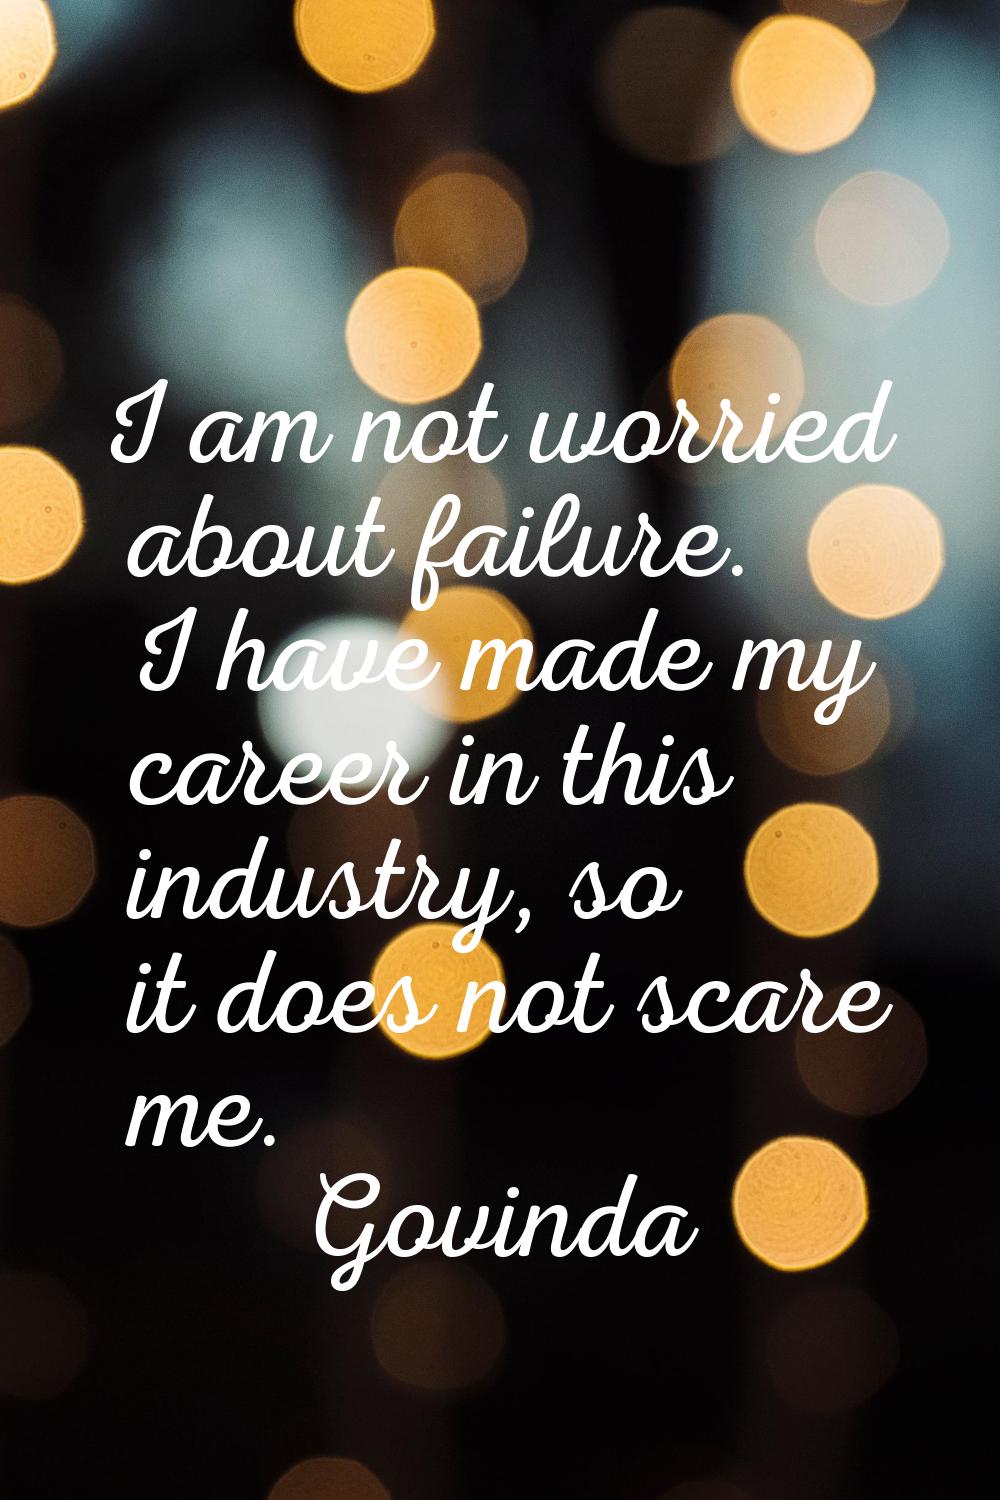 I am not worried about failure. I have made my career in this industry, so it does not scare me.